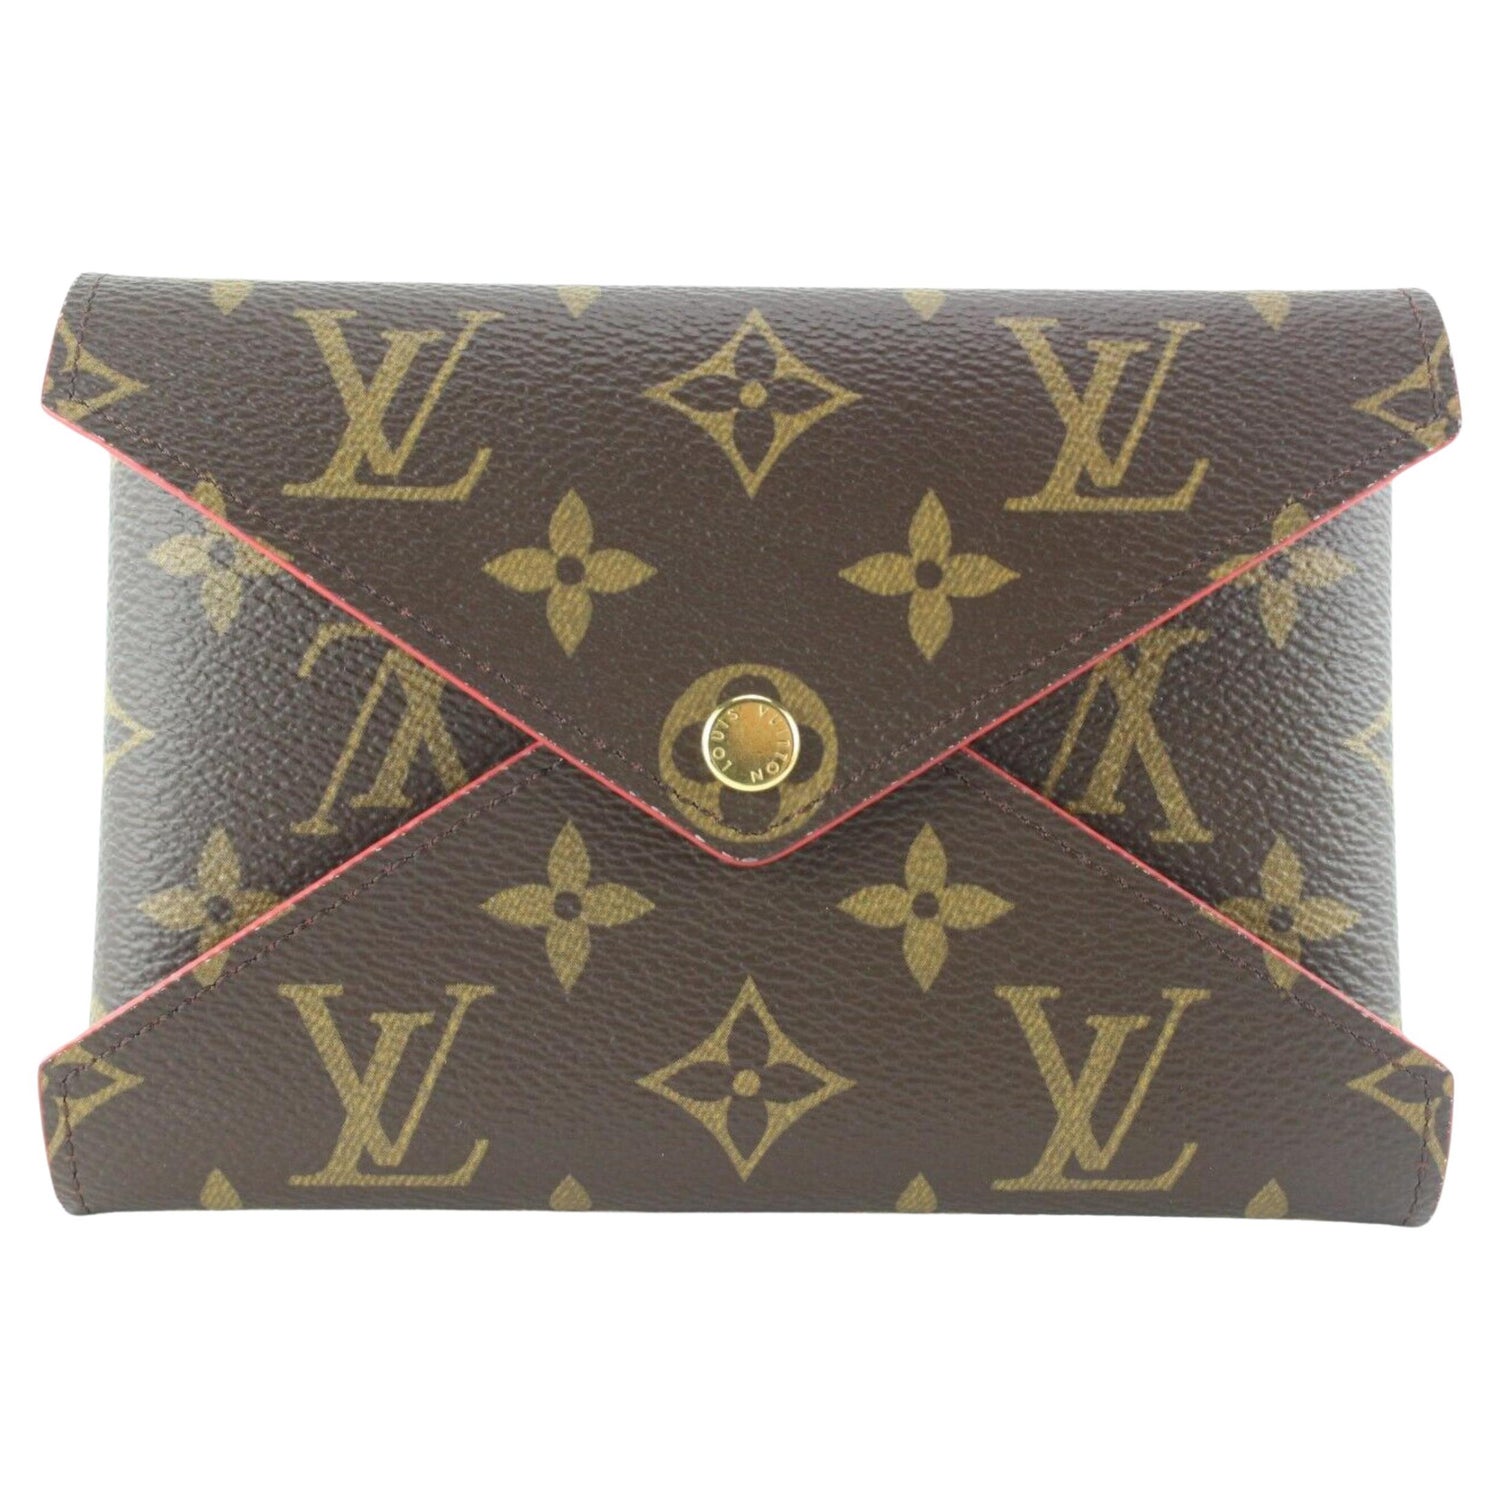 Louis Vuitton - Authenticated Kirigami Purse - Patent Leather Brown for Women, Never Worn